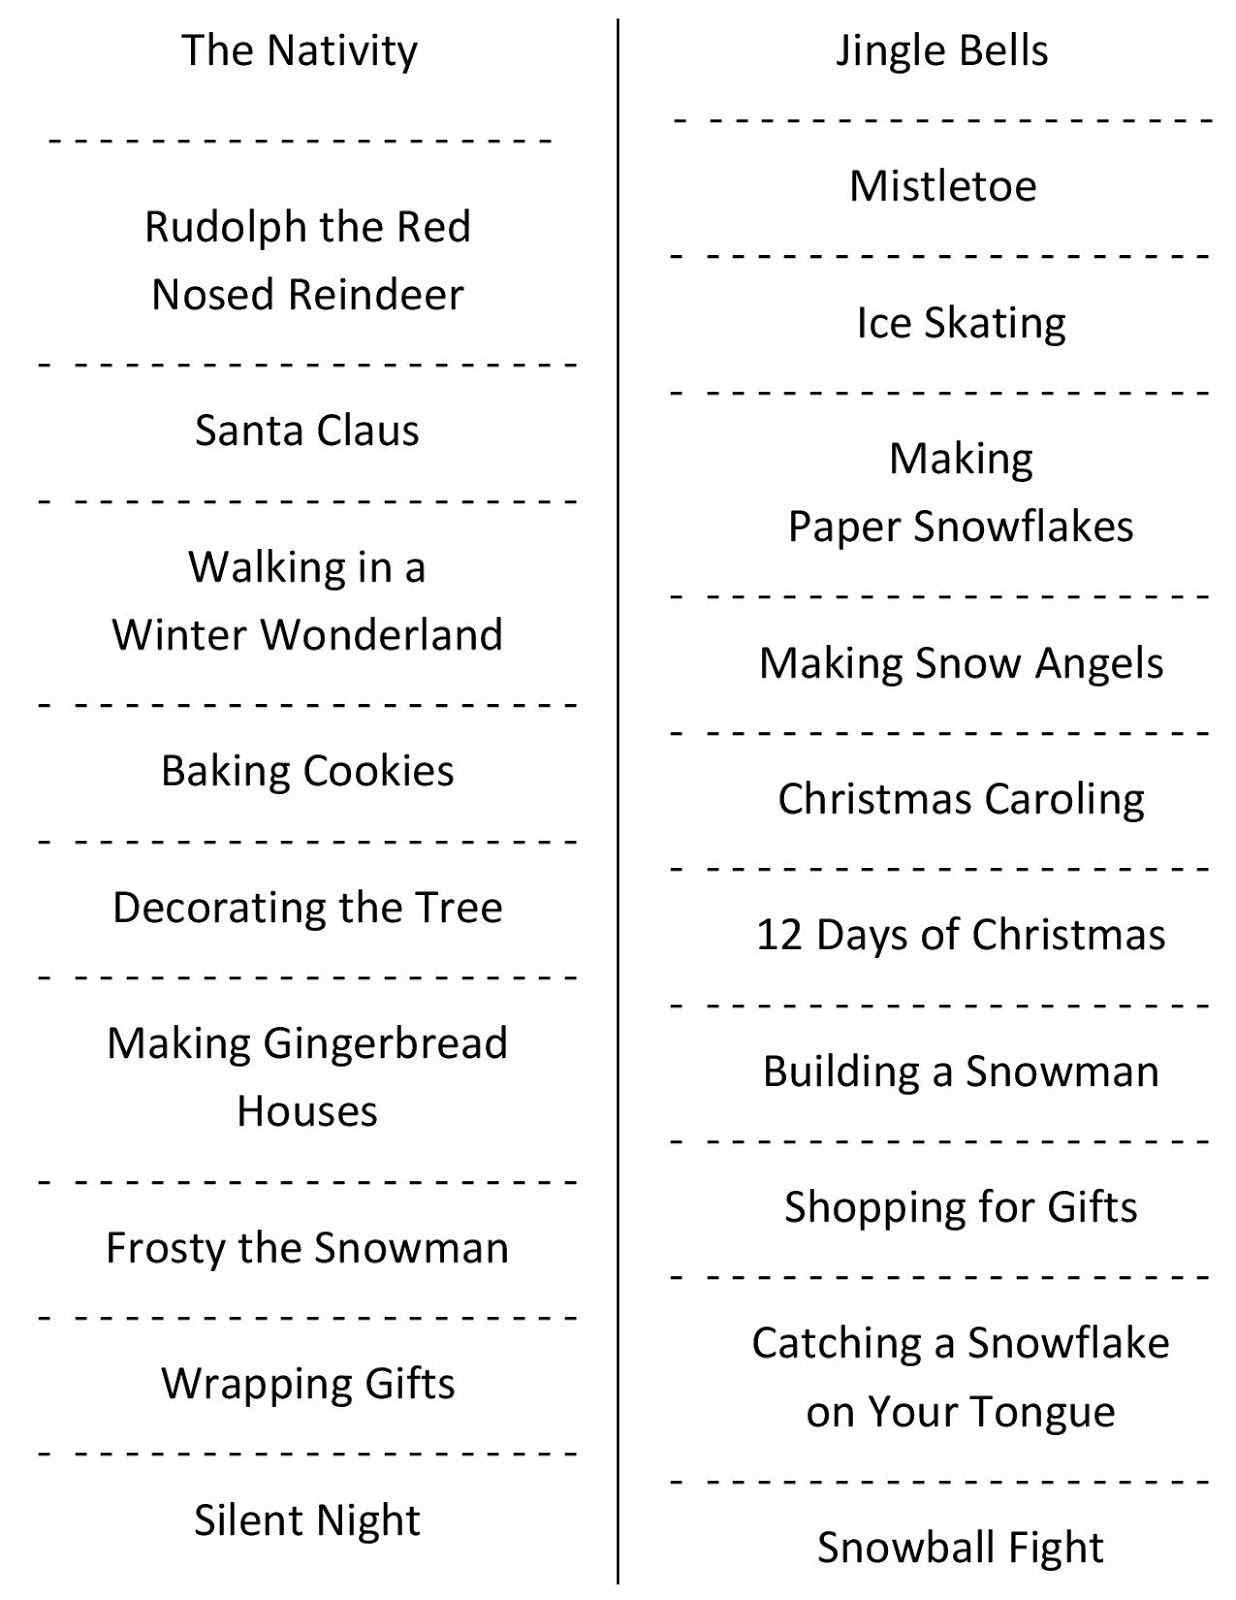 Holiday Party Games For Adults Christmas The Office Elegant - Holiday Office Party Games Free Printable